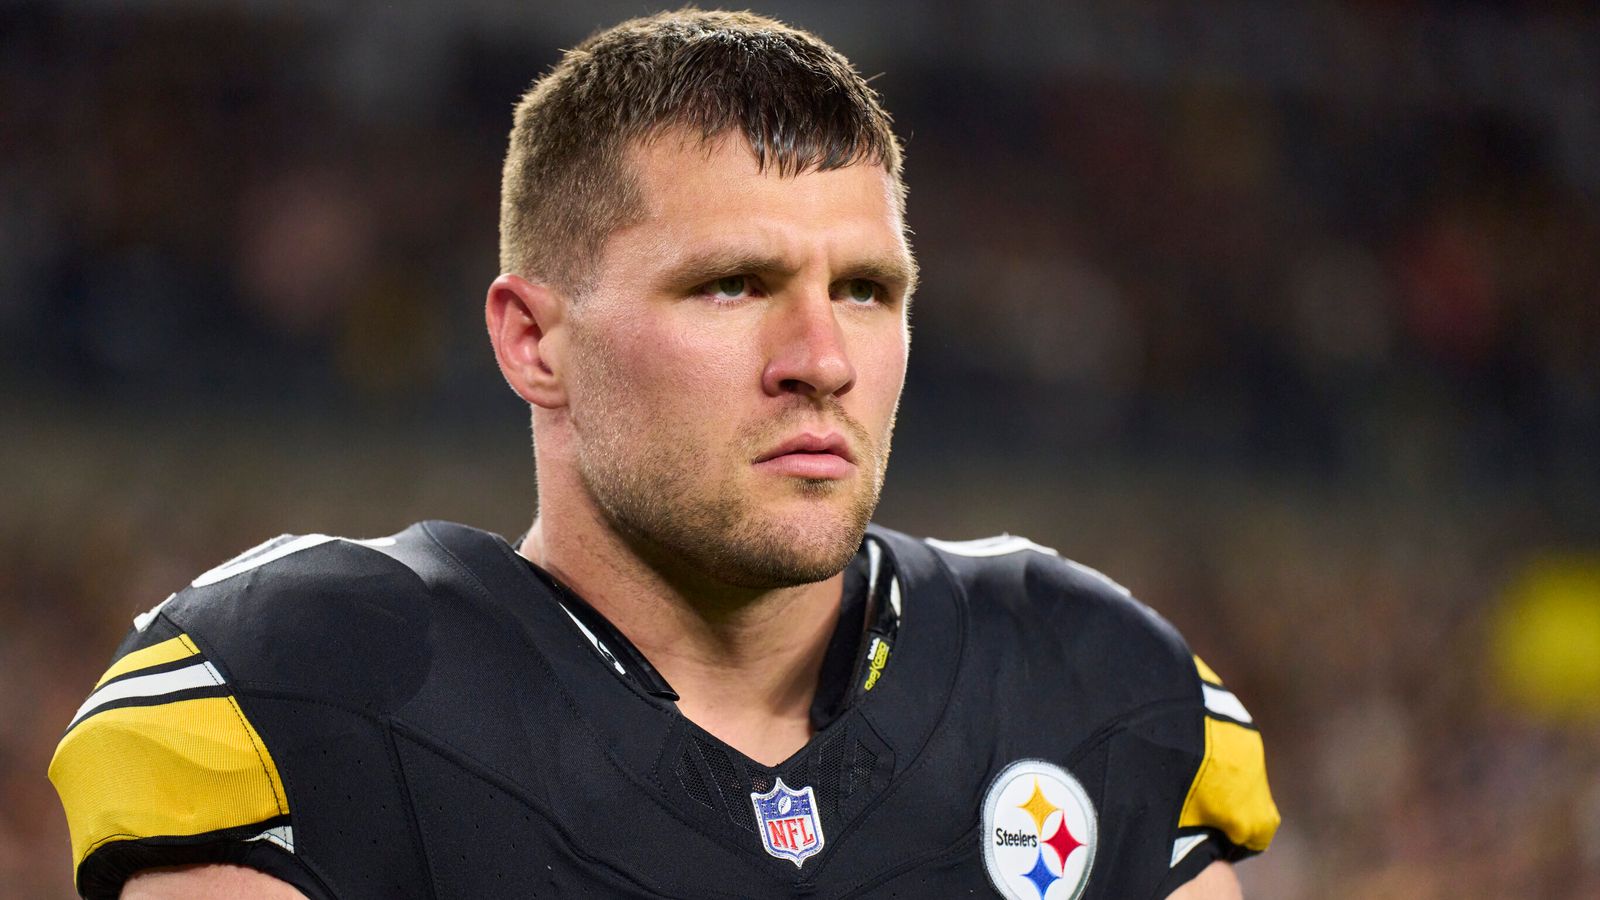 AM SORRY; Reason Why i left Steelers today. T.J. Watt announcement…